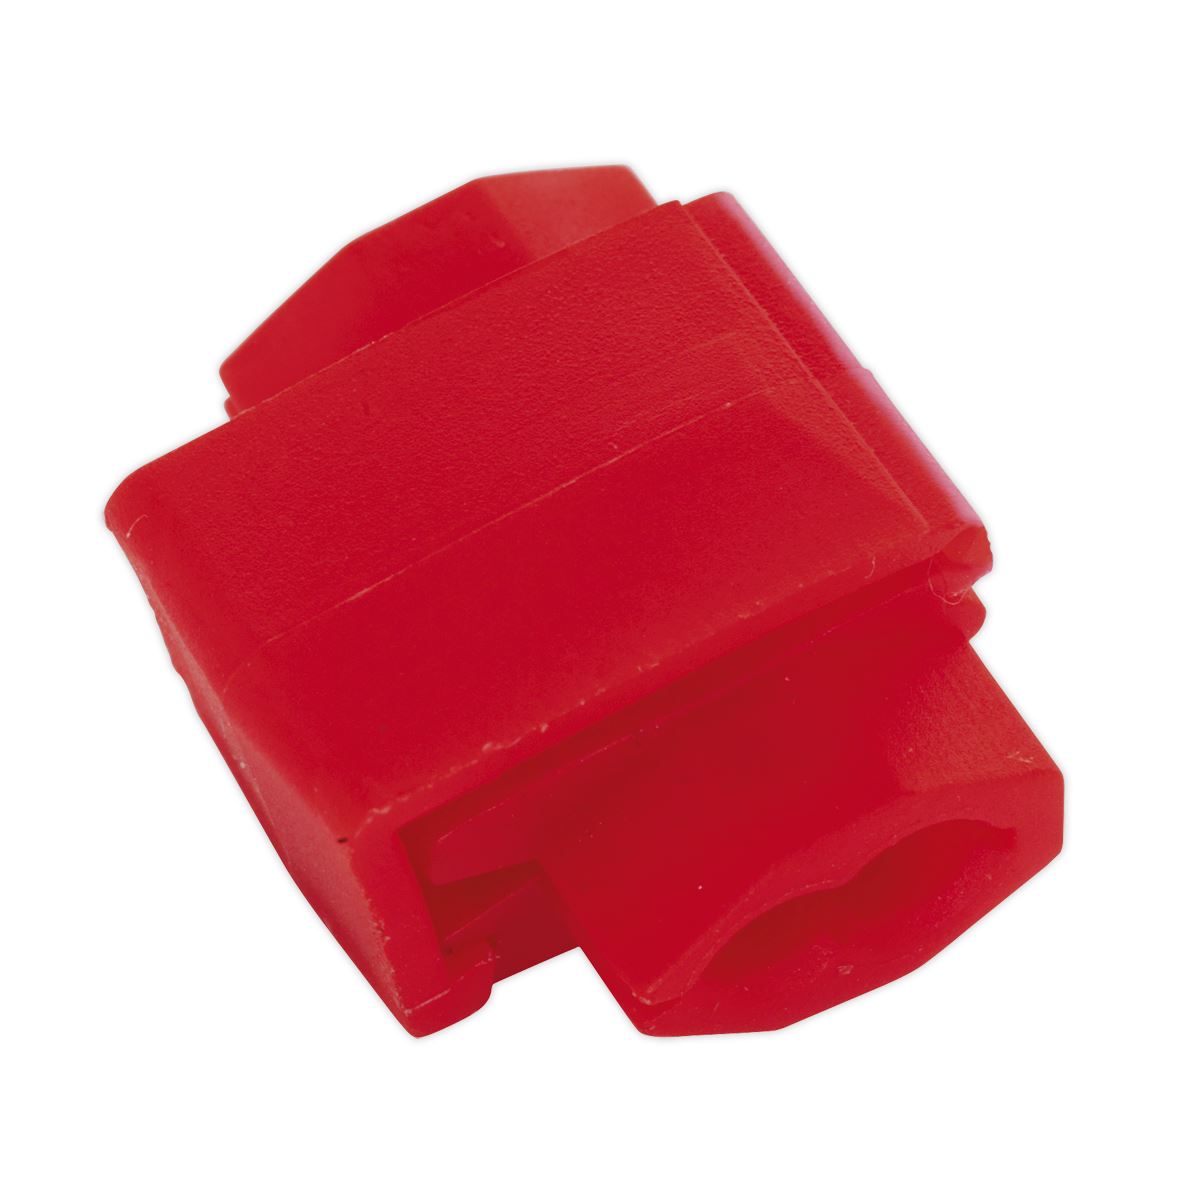 Sealey 100 Pack Red Quick Splice Connector